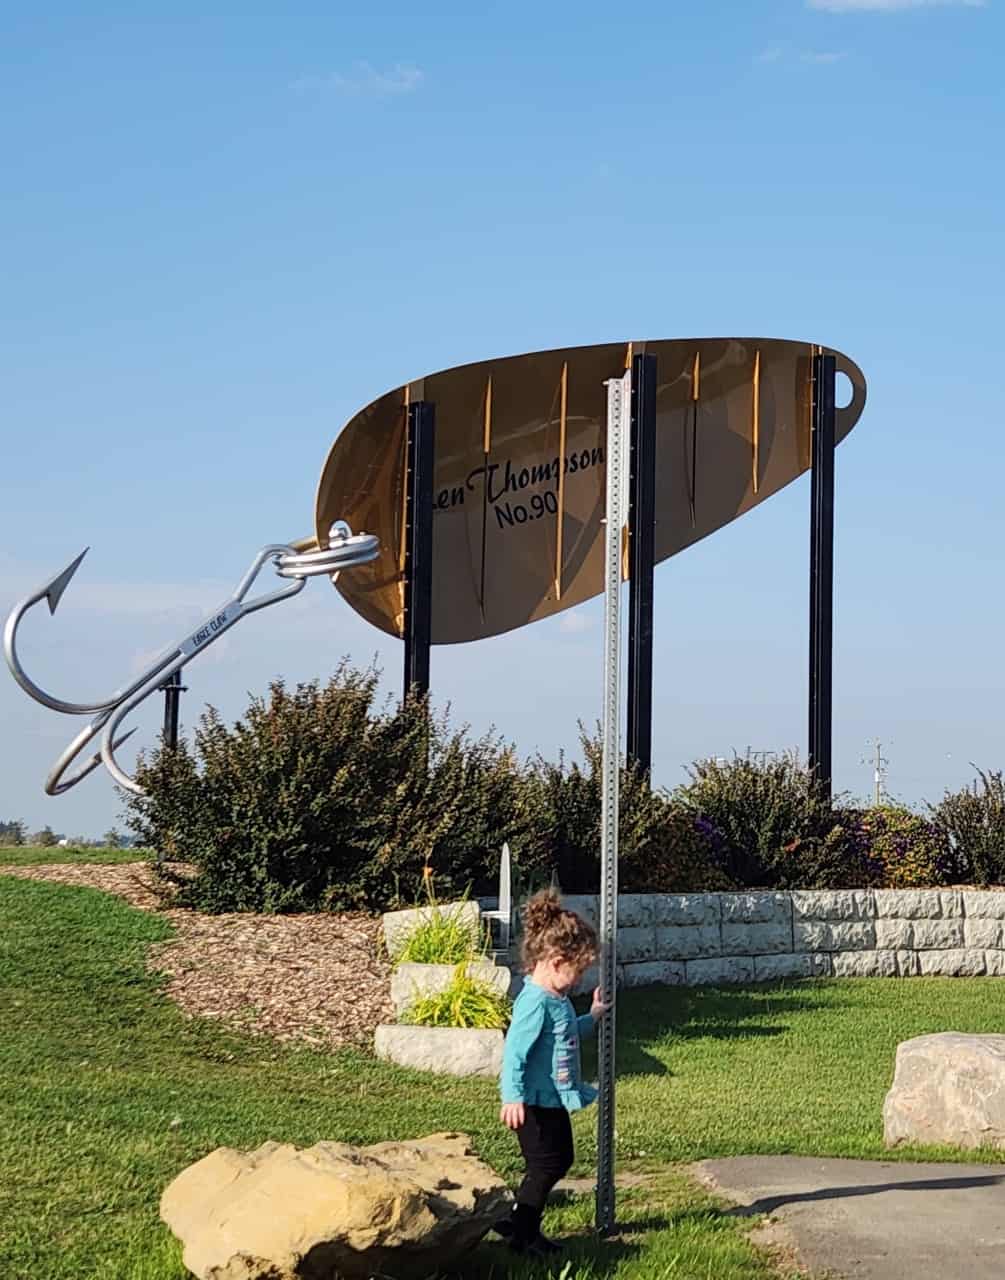 Lacombe is Home to the Len Thompson Company  - The Worlds Largest Fishing Lure is a Len Thompson #90 five of Diamonds 